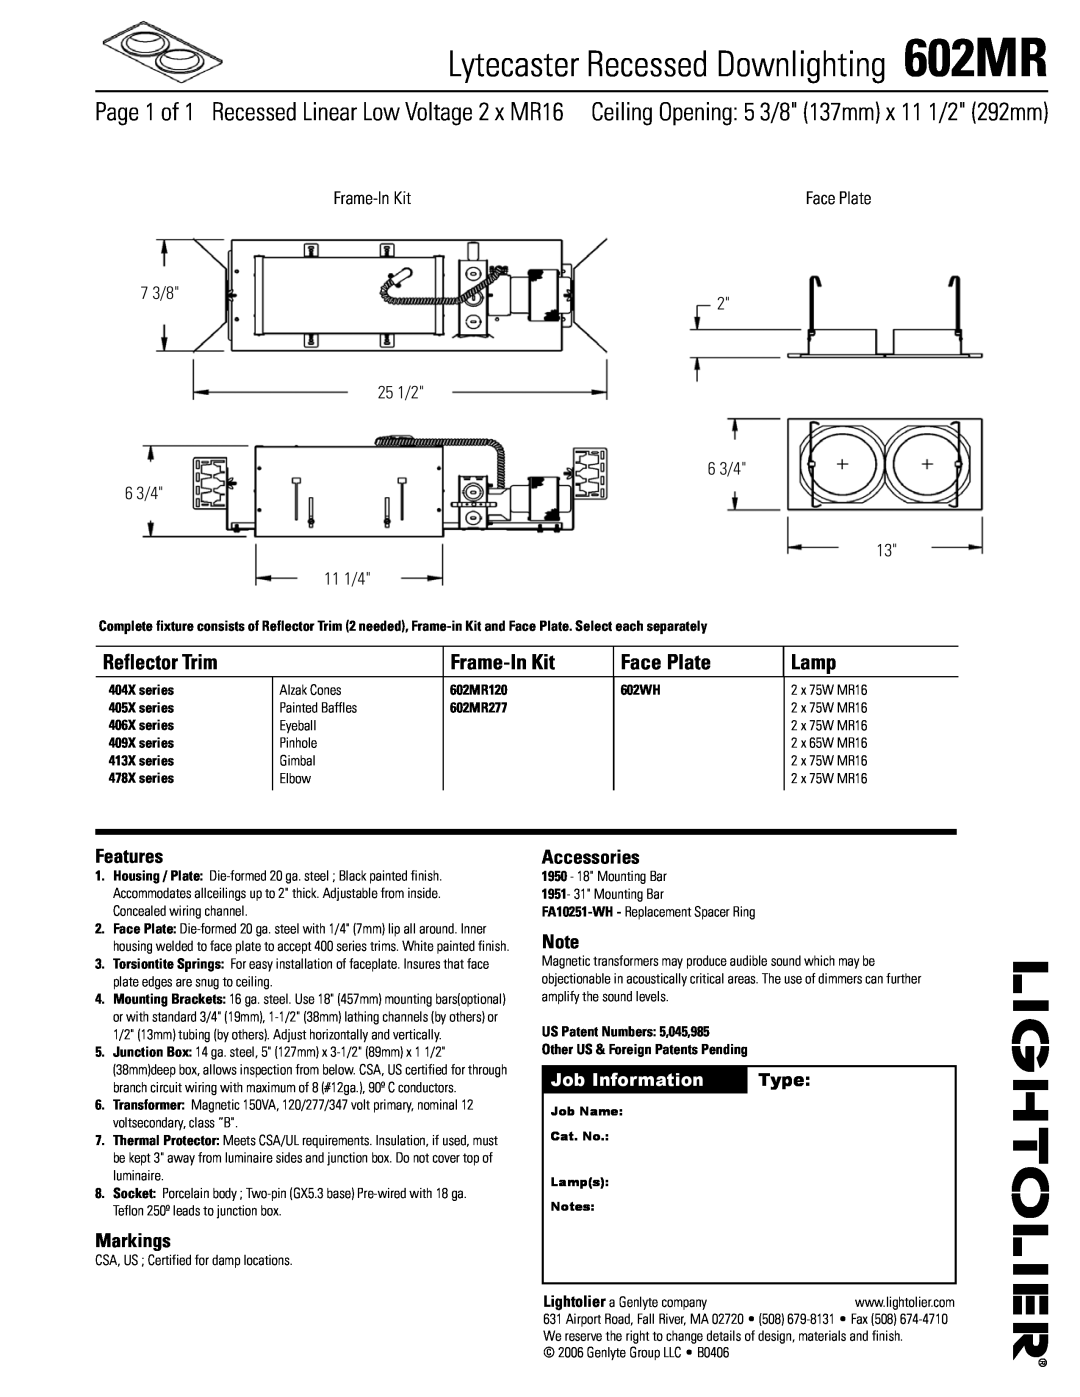 Lightolier manual Lytecaster Recessed Downlighting 602MR, Page 1 of 1 Recessed Linear Low Voltage 2 x MR16, Frame-InKit 